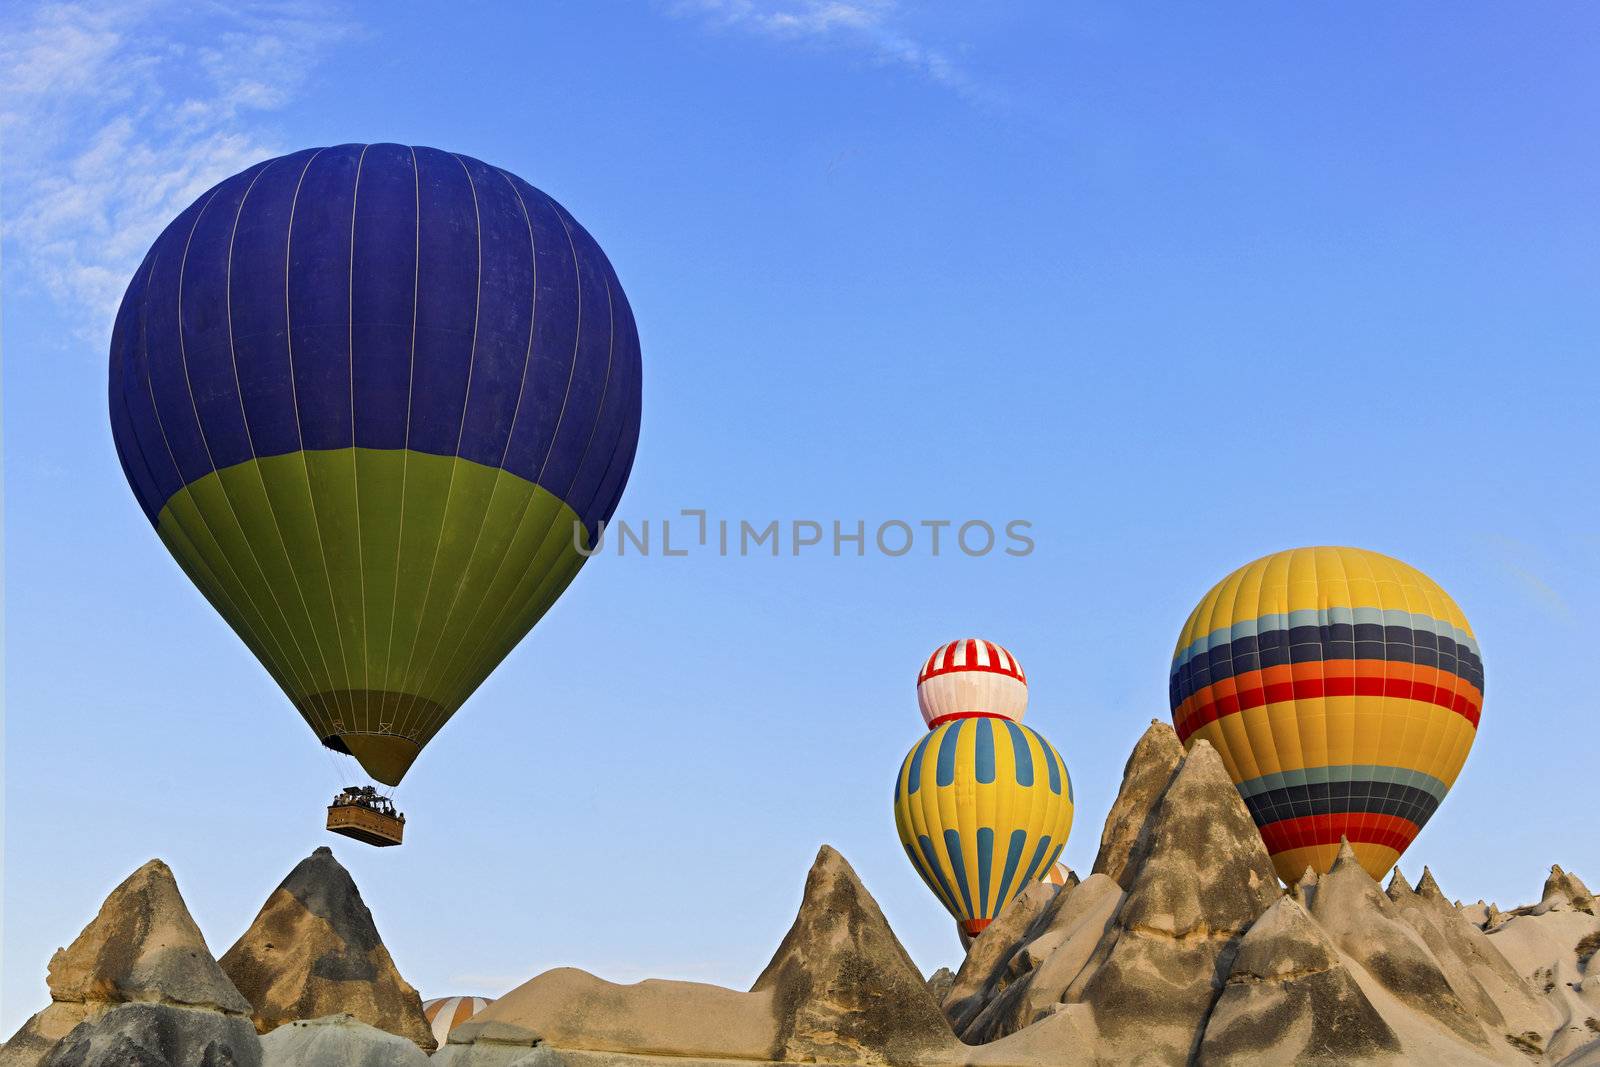 Hot air balloons captured coming over the limestone ridge near Goreme, Caapadocia, Turkey. The weathered mineral peaks which have eroded through evolution present a surreal backdrop to the striking colours of the passenger ladened aircraft.